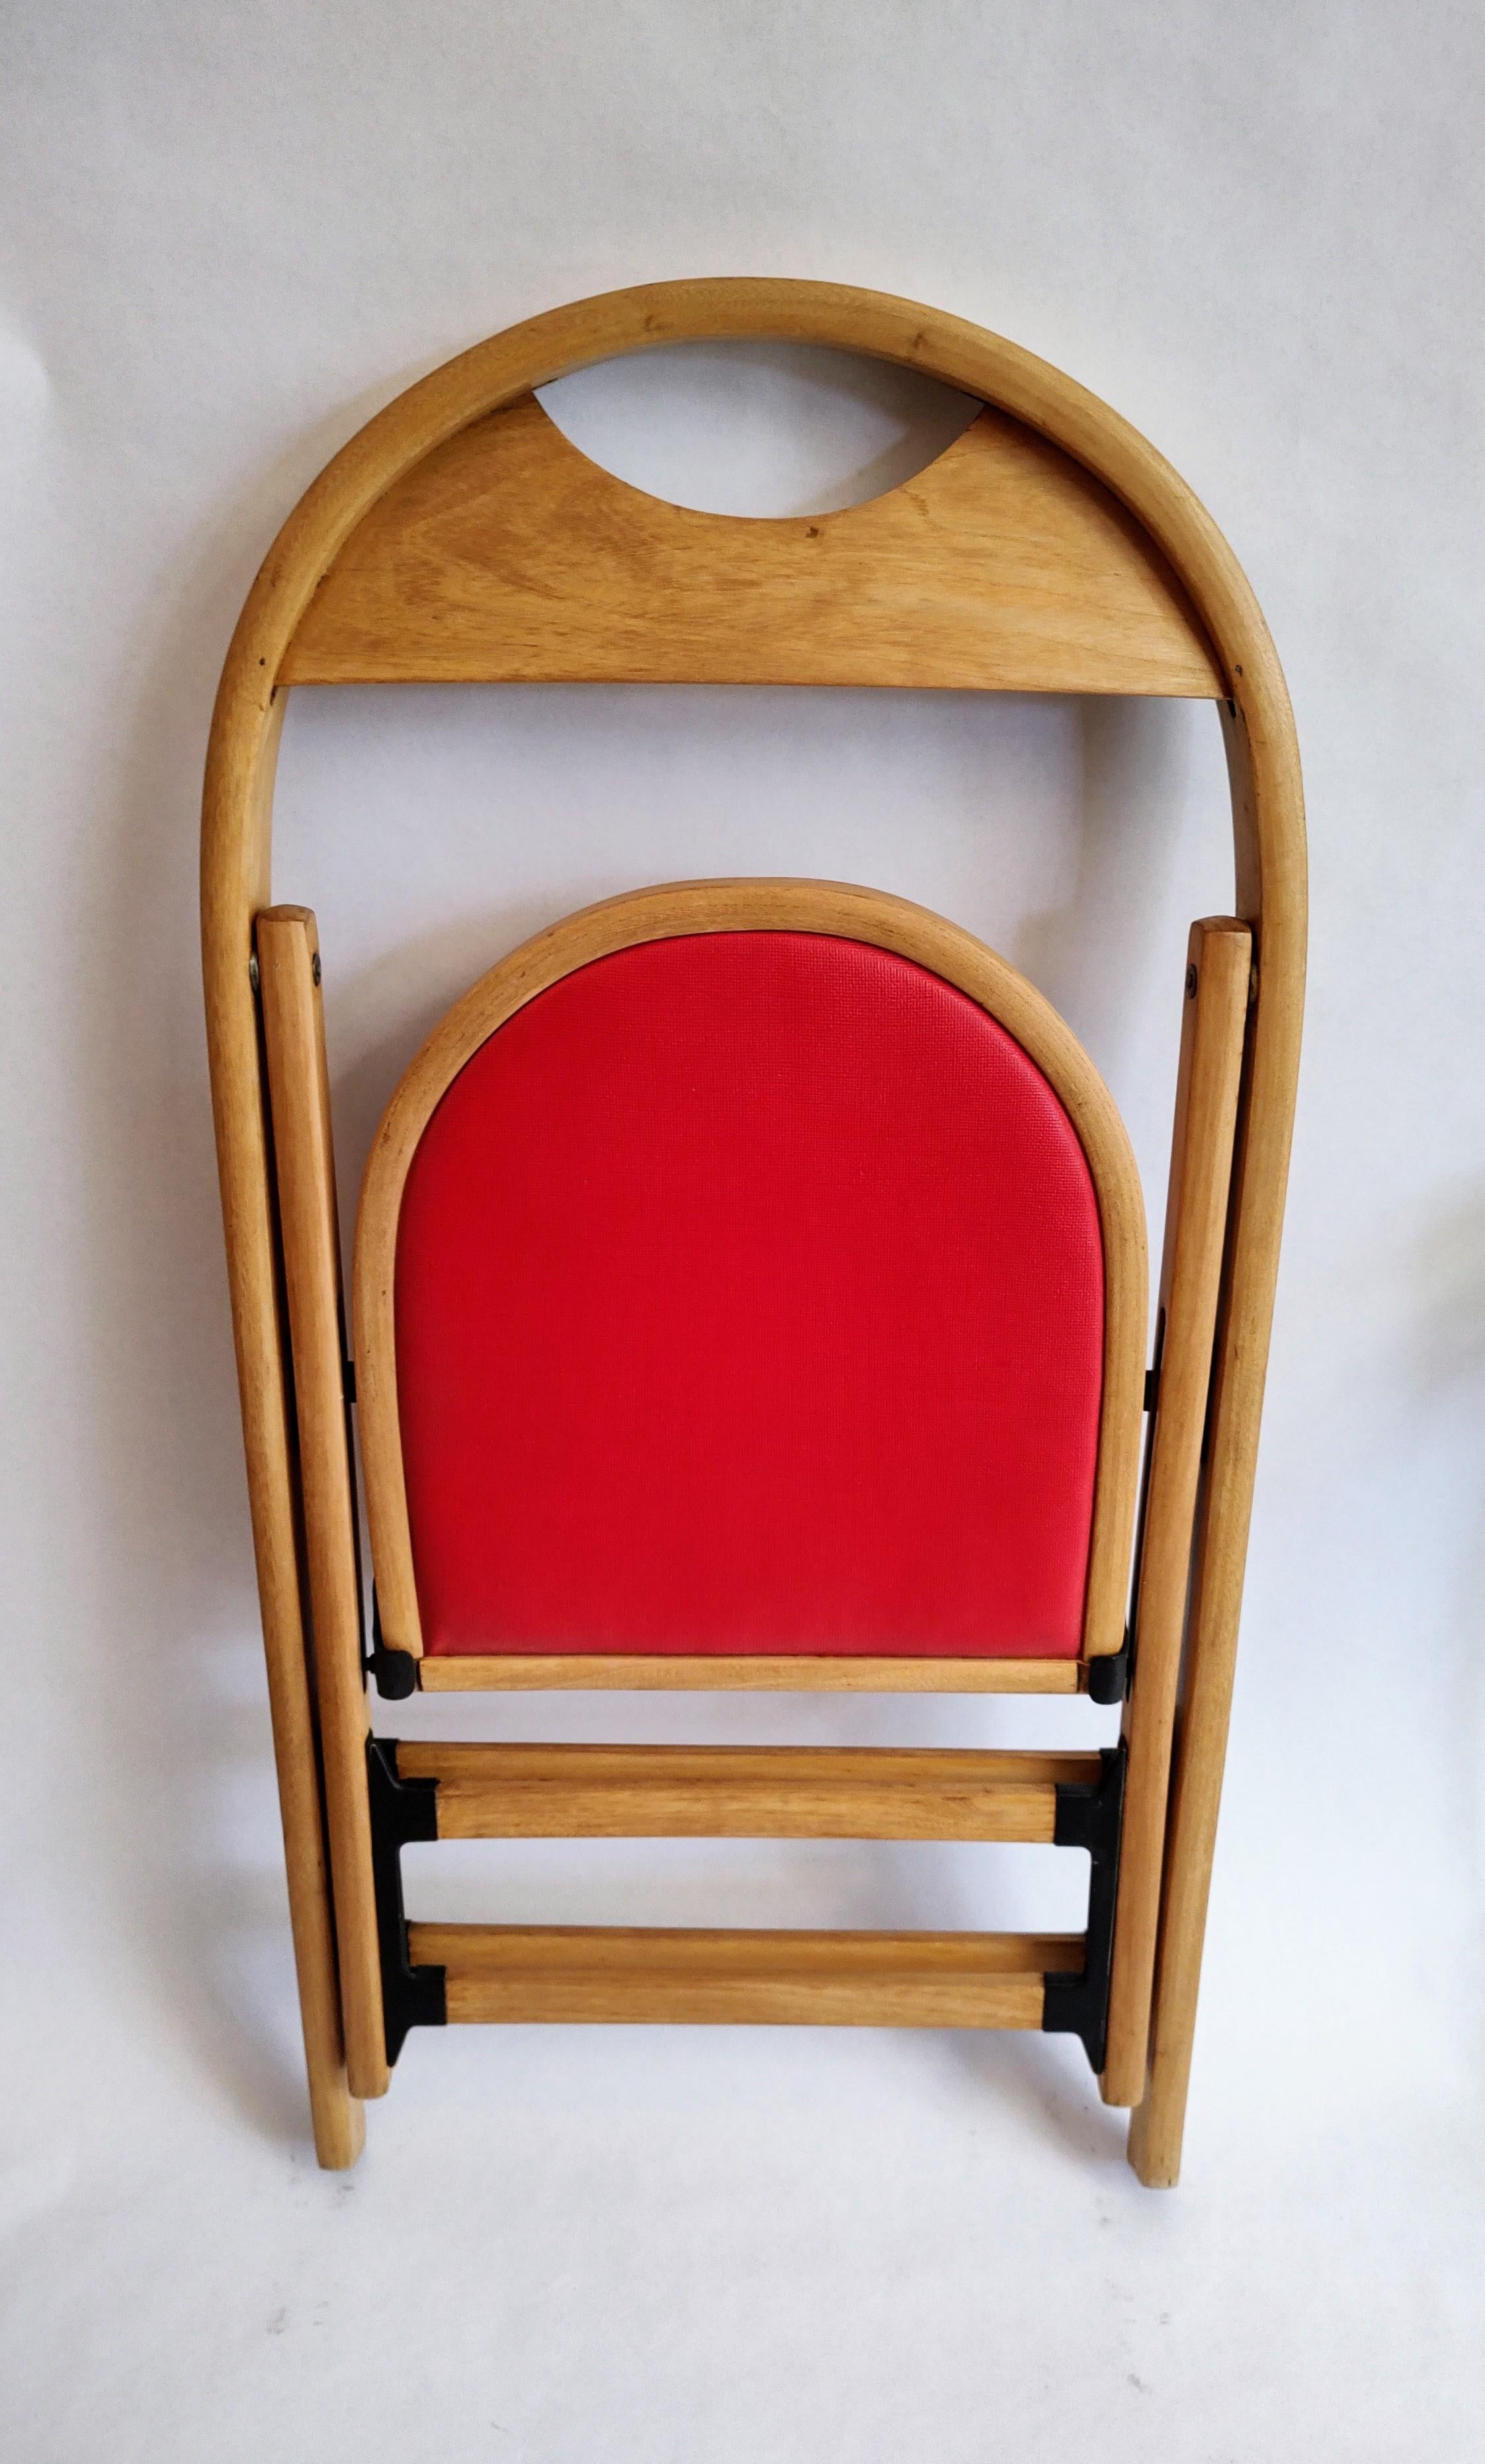 Set of 6 Slender Folding Chairs from 